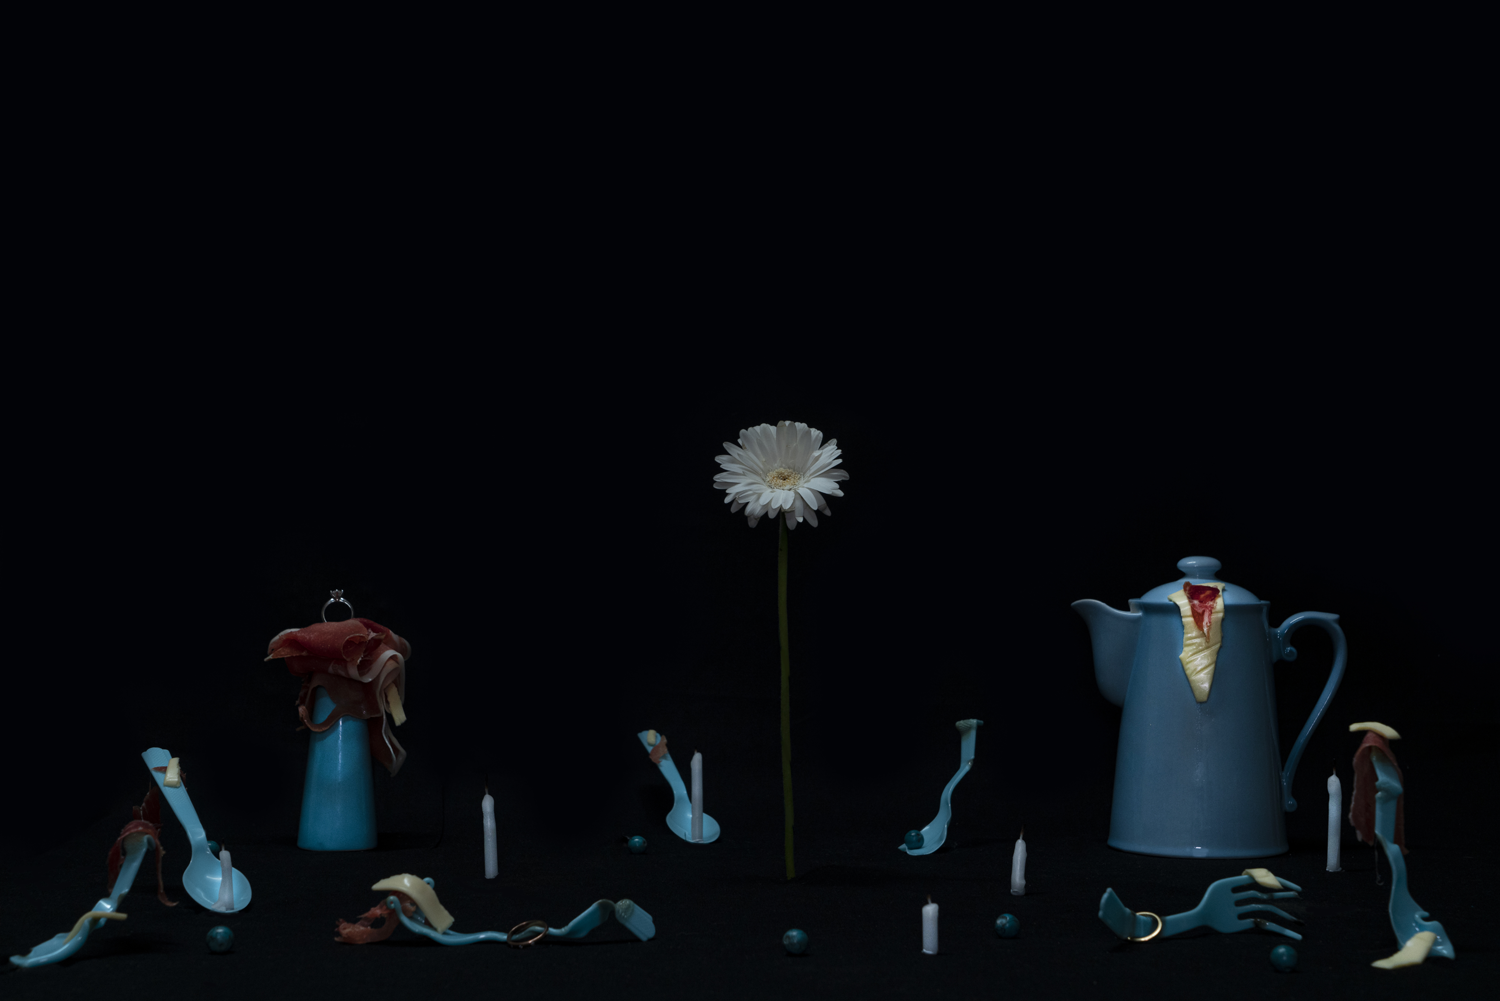 Dark digital image of daisy standing amongst scattered items of blue milk jugs, melted plastic cutlery, small white unlit candles and jewellery items. 